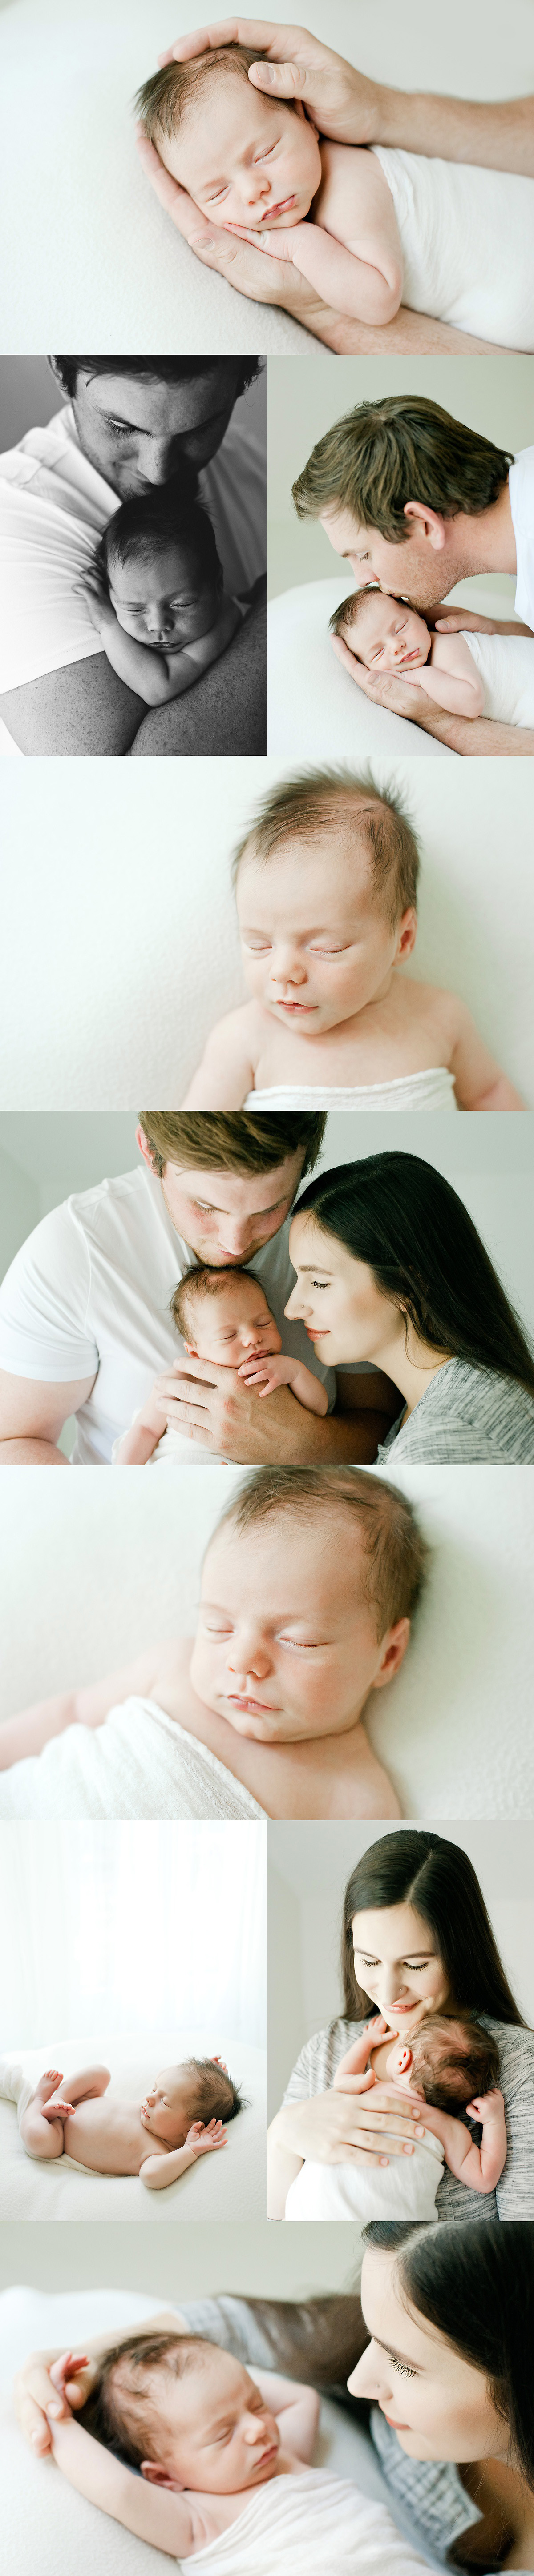 baby boy is held closely by his parents during newborn session